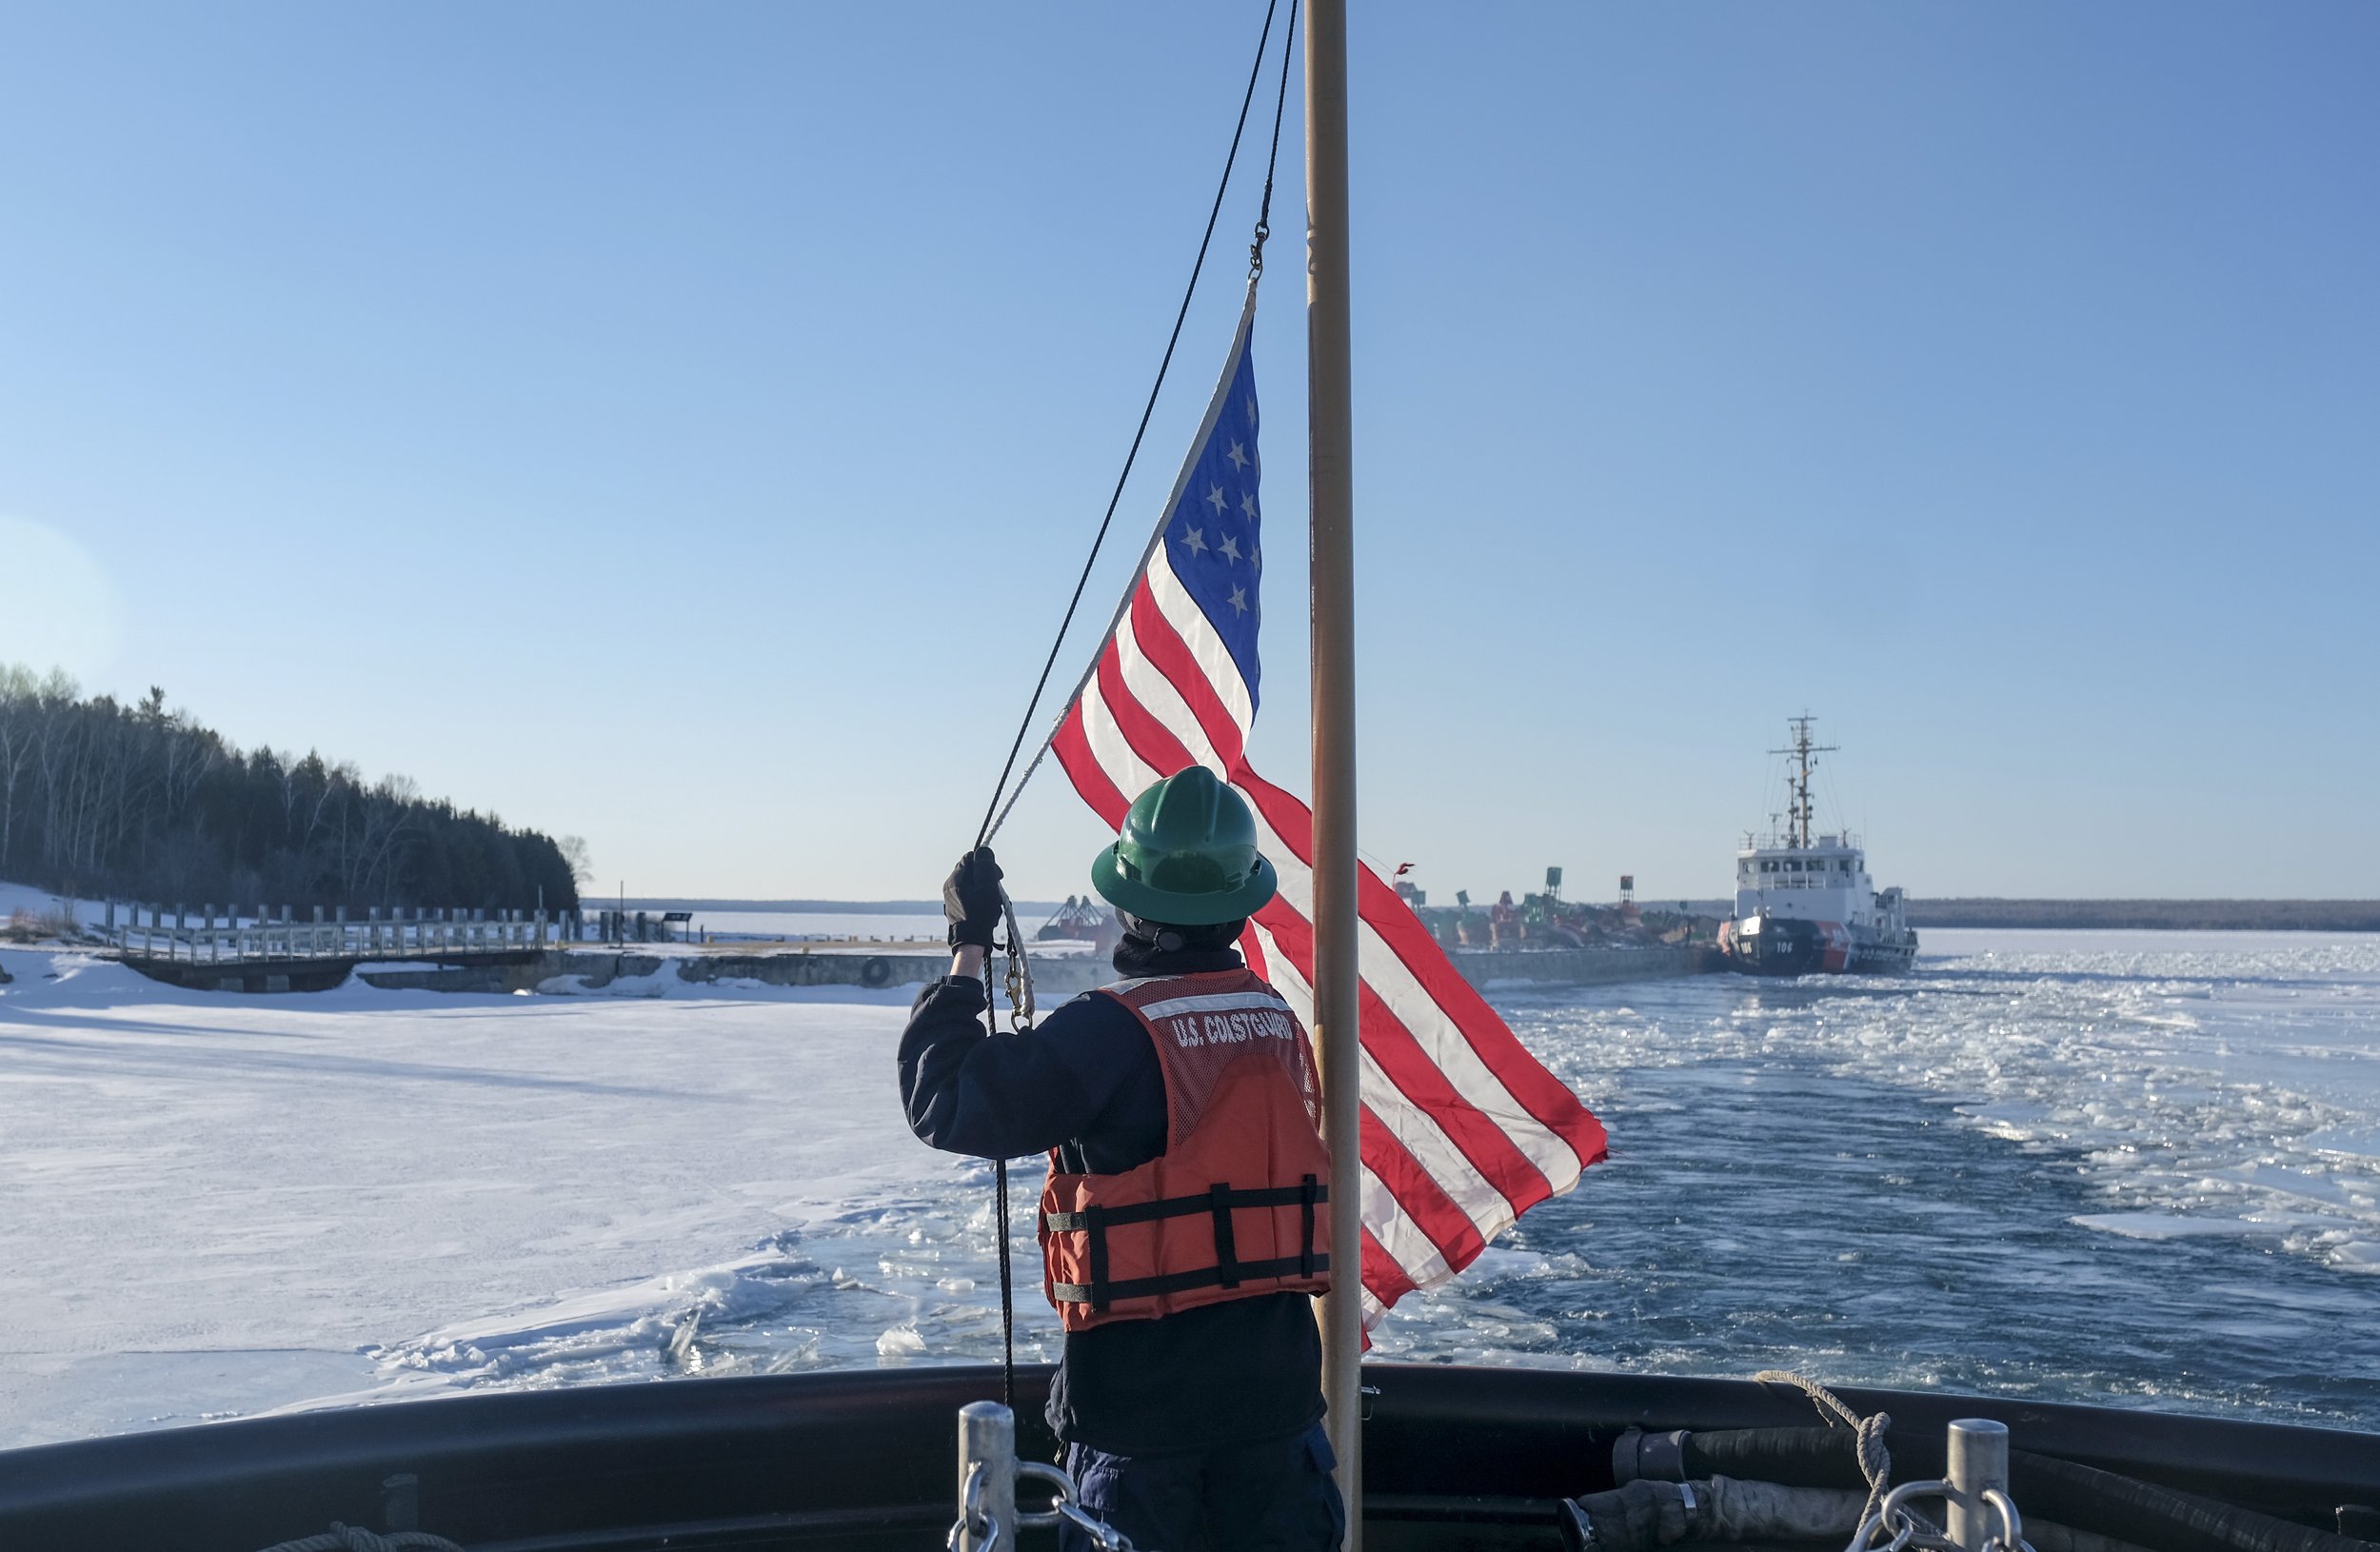  The flag is raised as the US Coast Guard Cutter ‘Katmai Bay’ departs its overnight mooring and resumes operations on Lake Huron during Ice Breaking operations on March 13, 2023.  